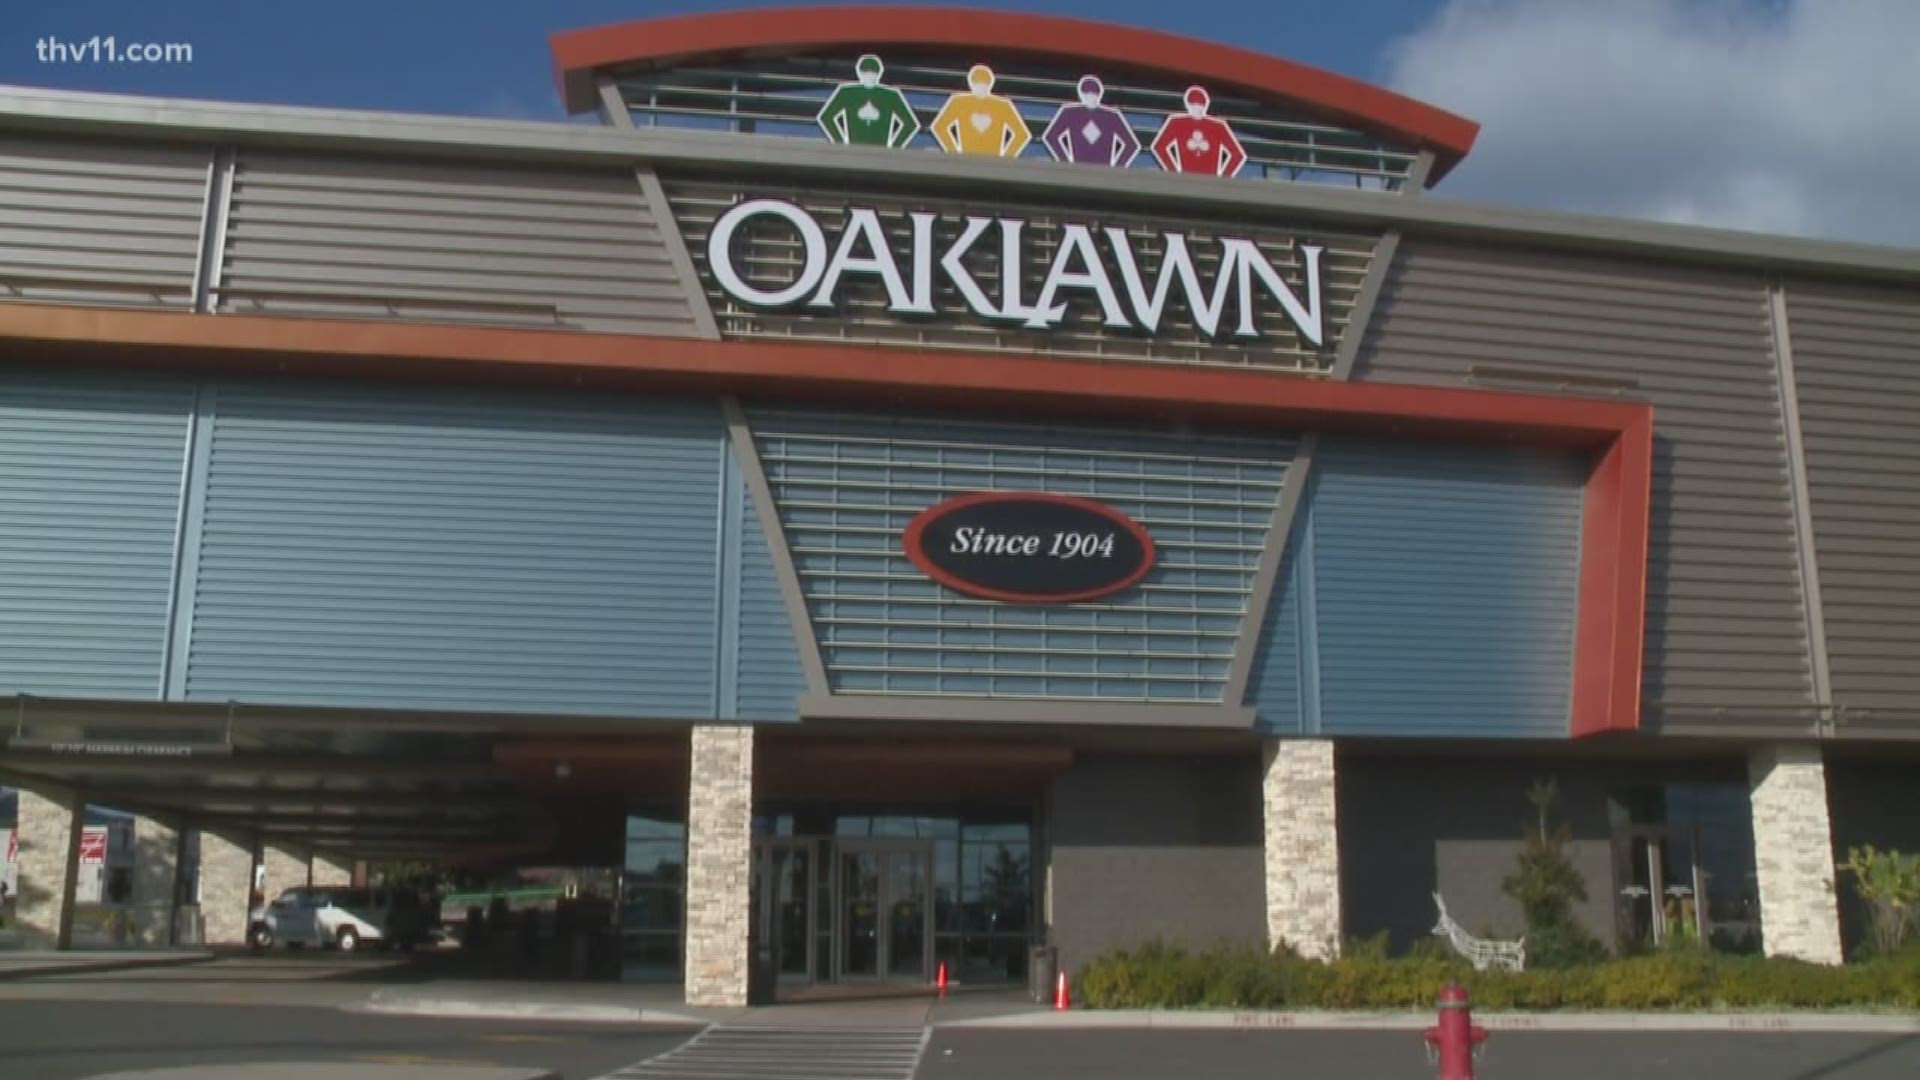 Oaklawn Racing and Gaming announced plans to build an expansion project in excess of $100 million that includes the construction of a high-rise hotel, multi-purpose event center, a larger gaming area, and additional on-site parking.